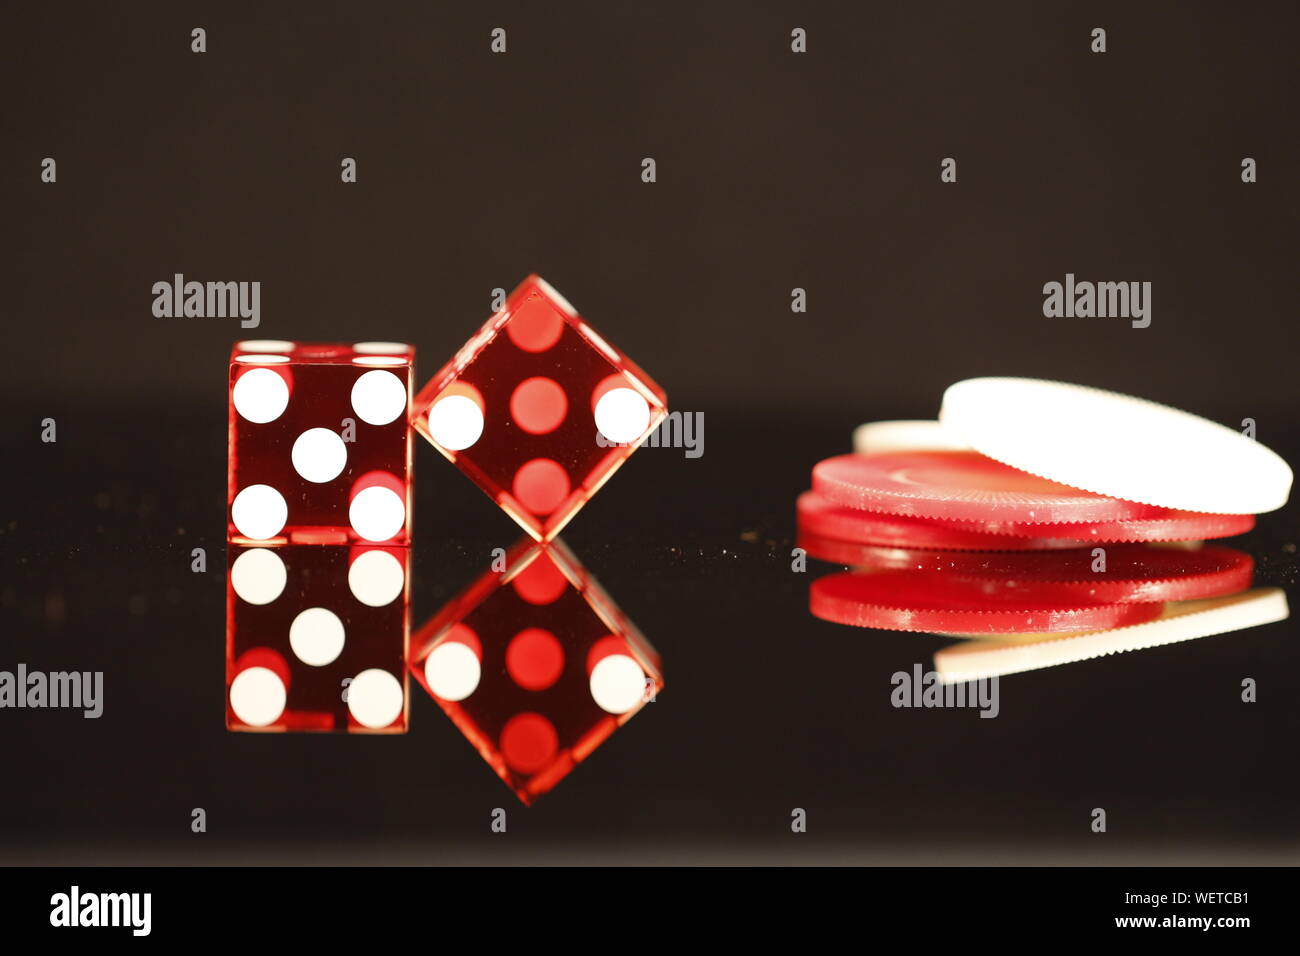 Two Red dice equaling 7 with red and white poker chips on a black reflective background Stock Photo